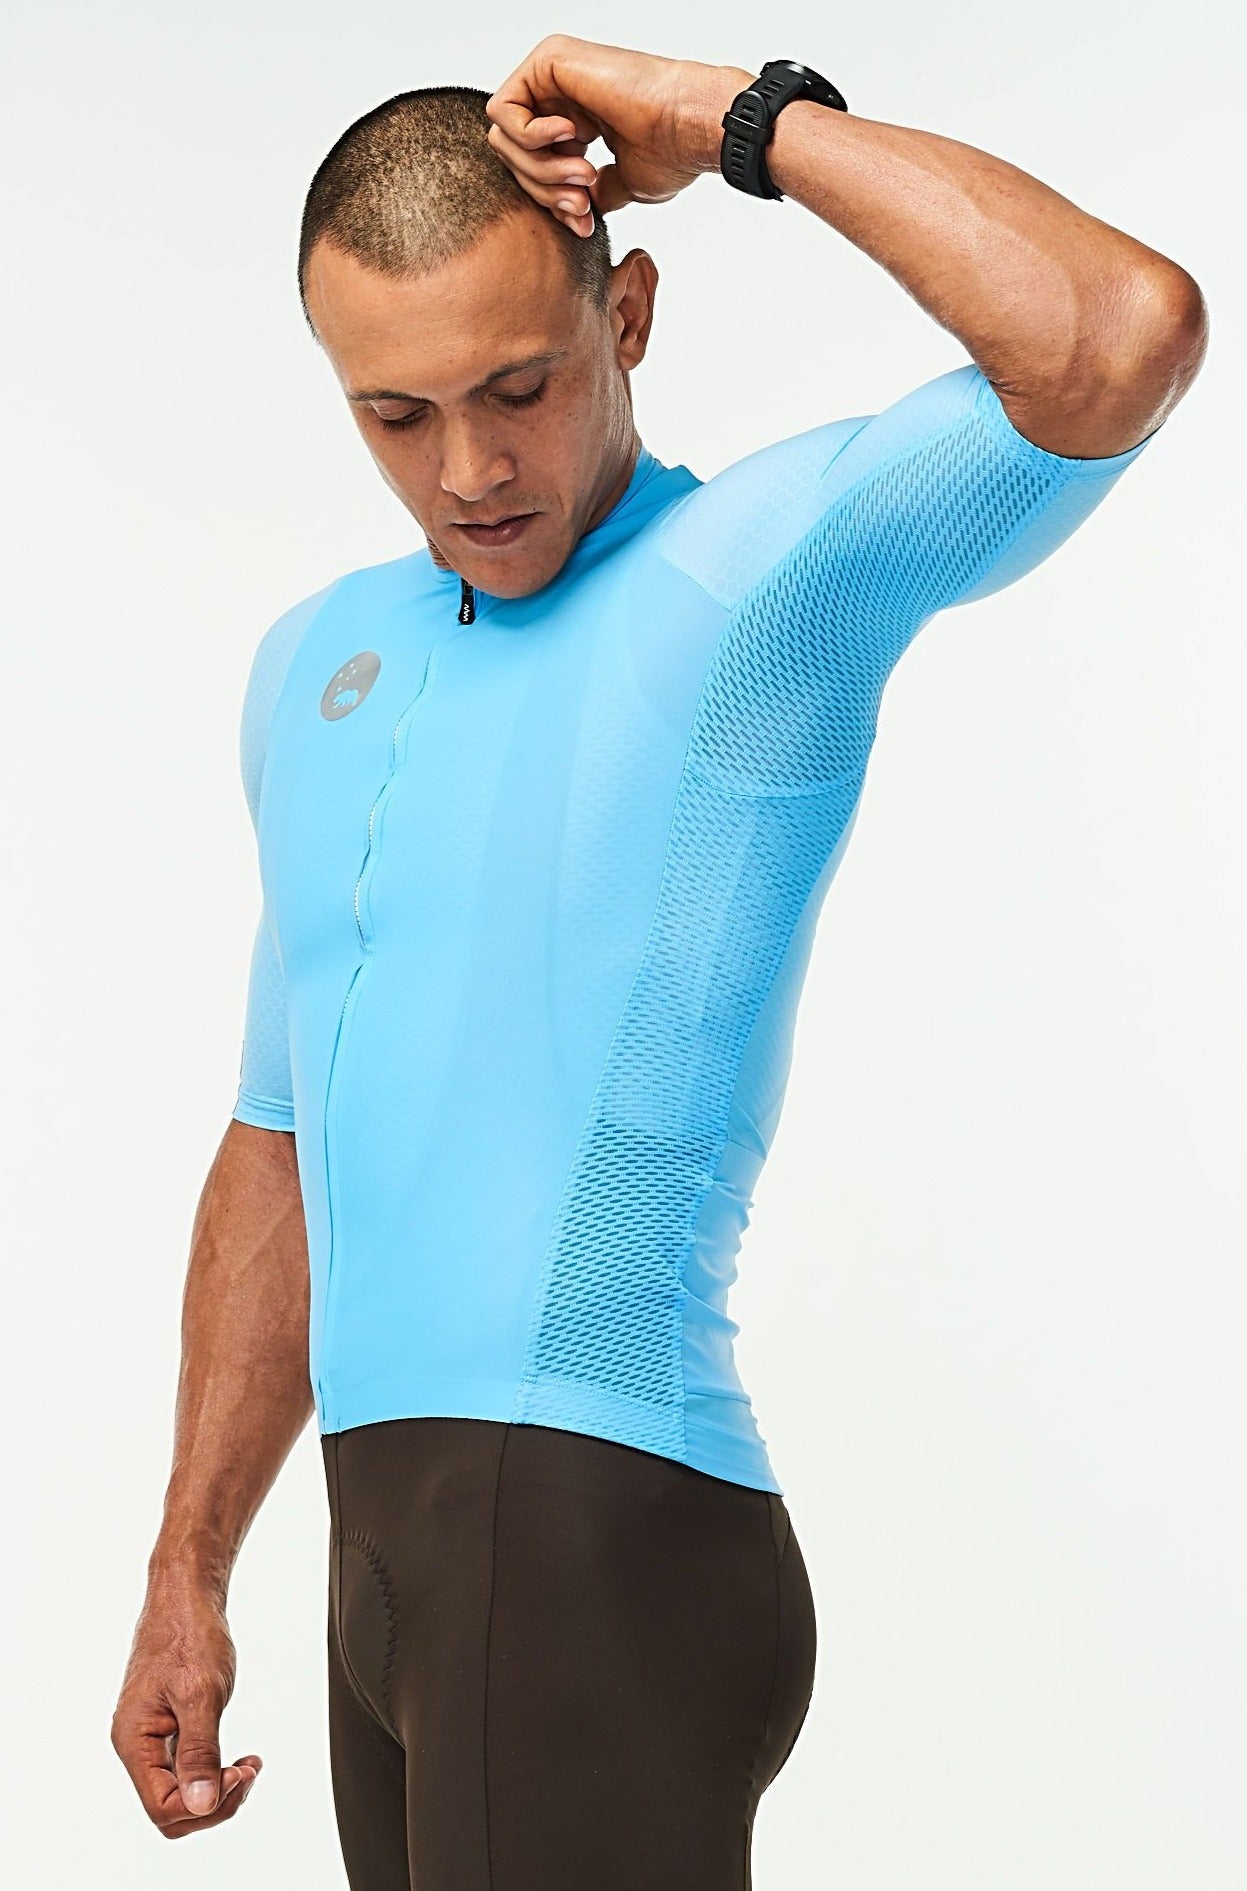 Model lifting left arm of men's Hex Racer Jersey. Flexible blue cycling jersey with mesh panels.